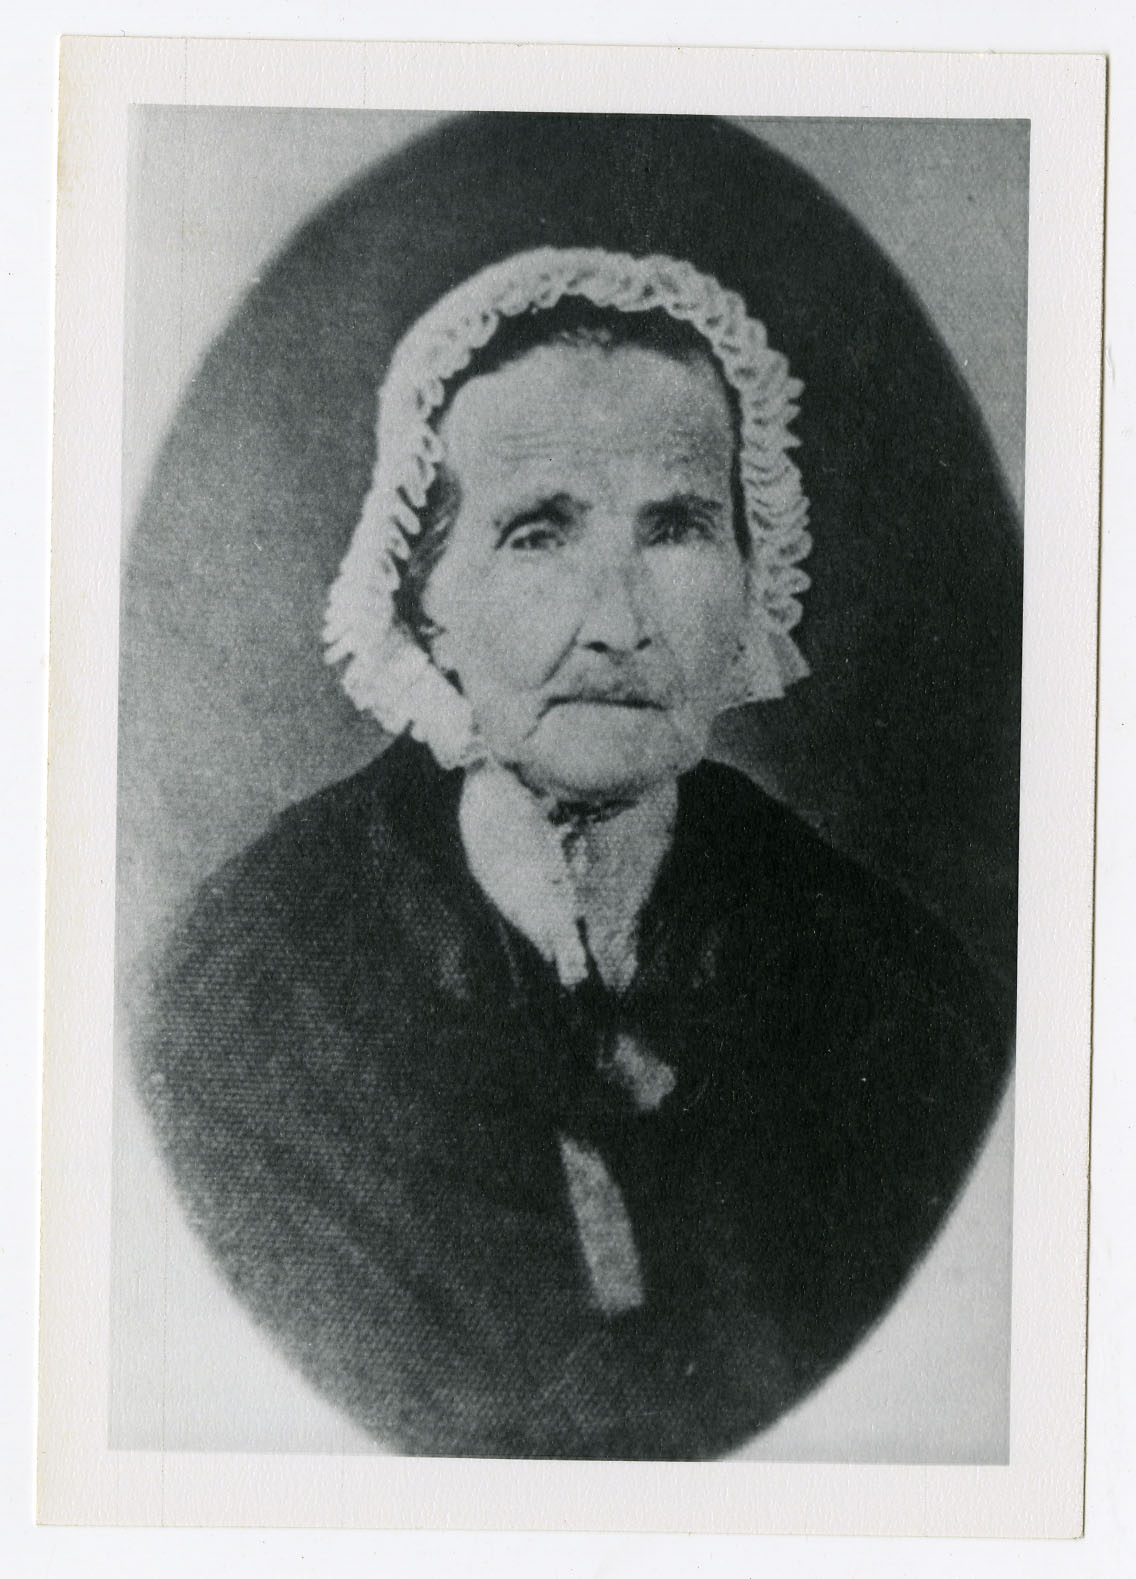 Jane Simpson Neely Boyd - 1775 - 1858, the daughter of FC's Rev. John Simpson and Mary Remer.